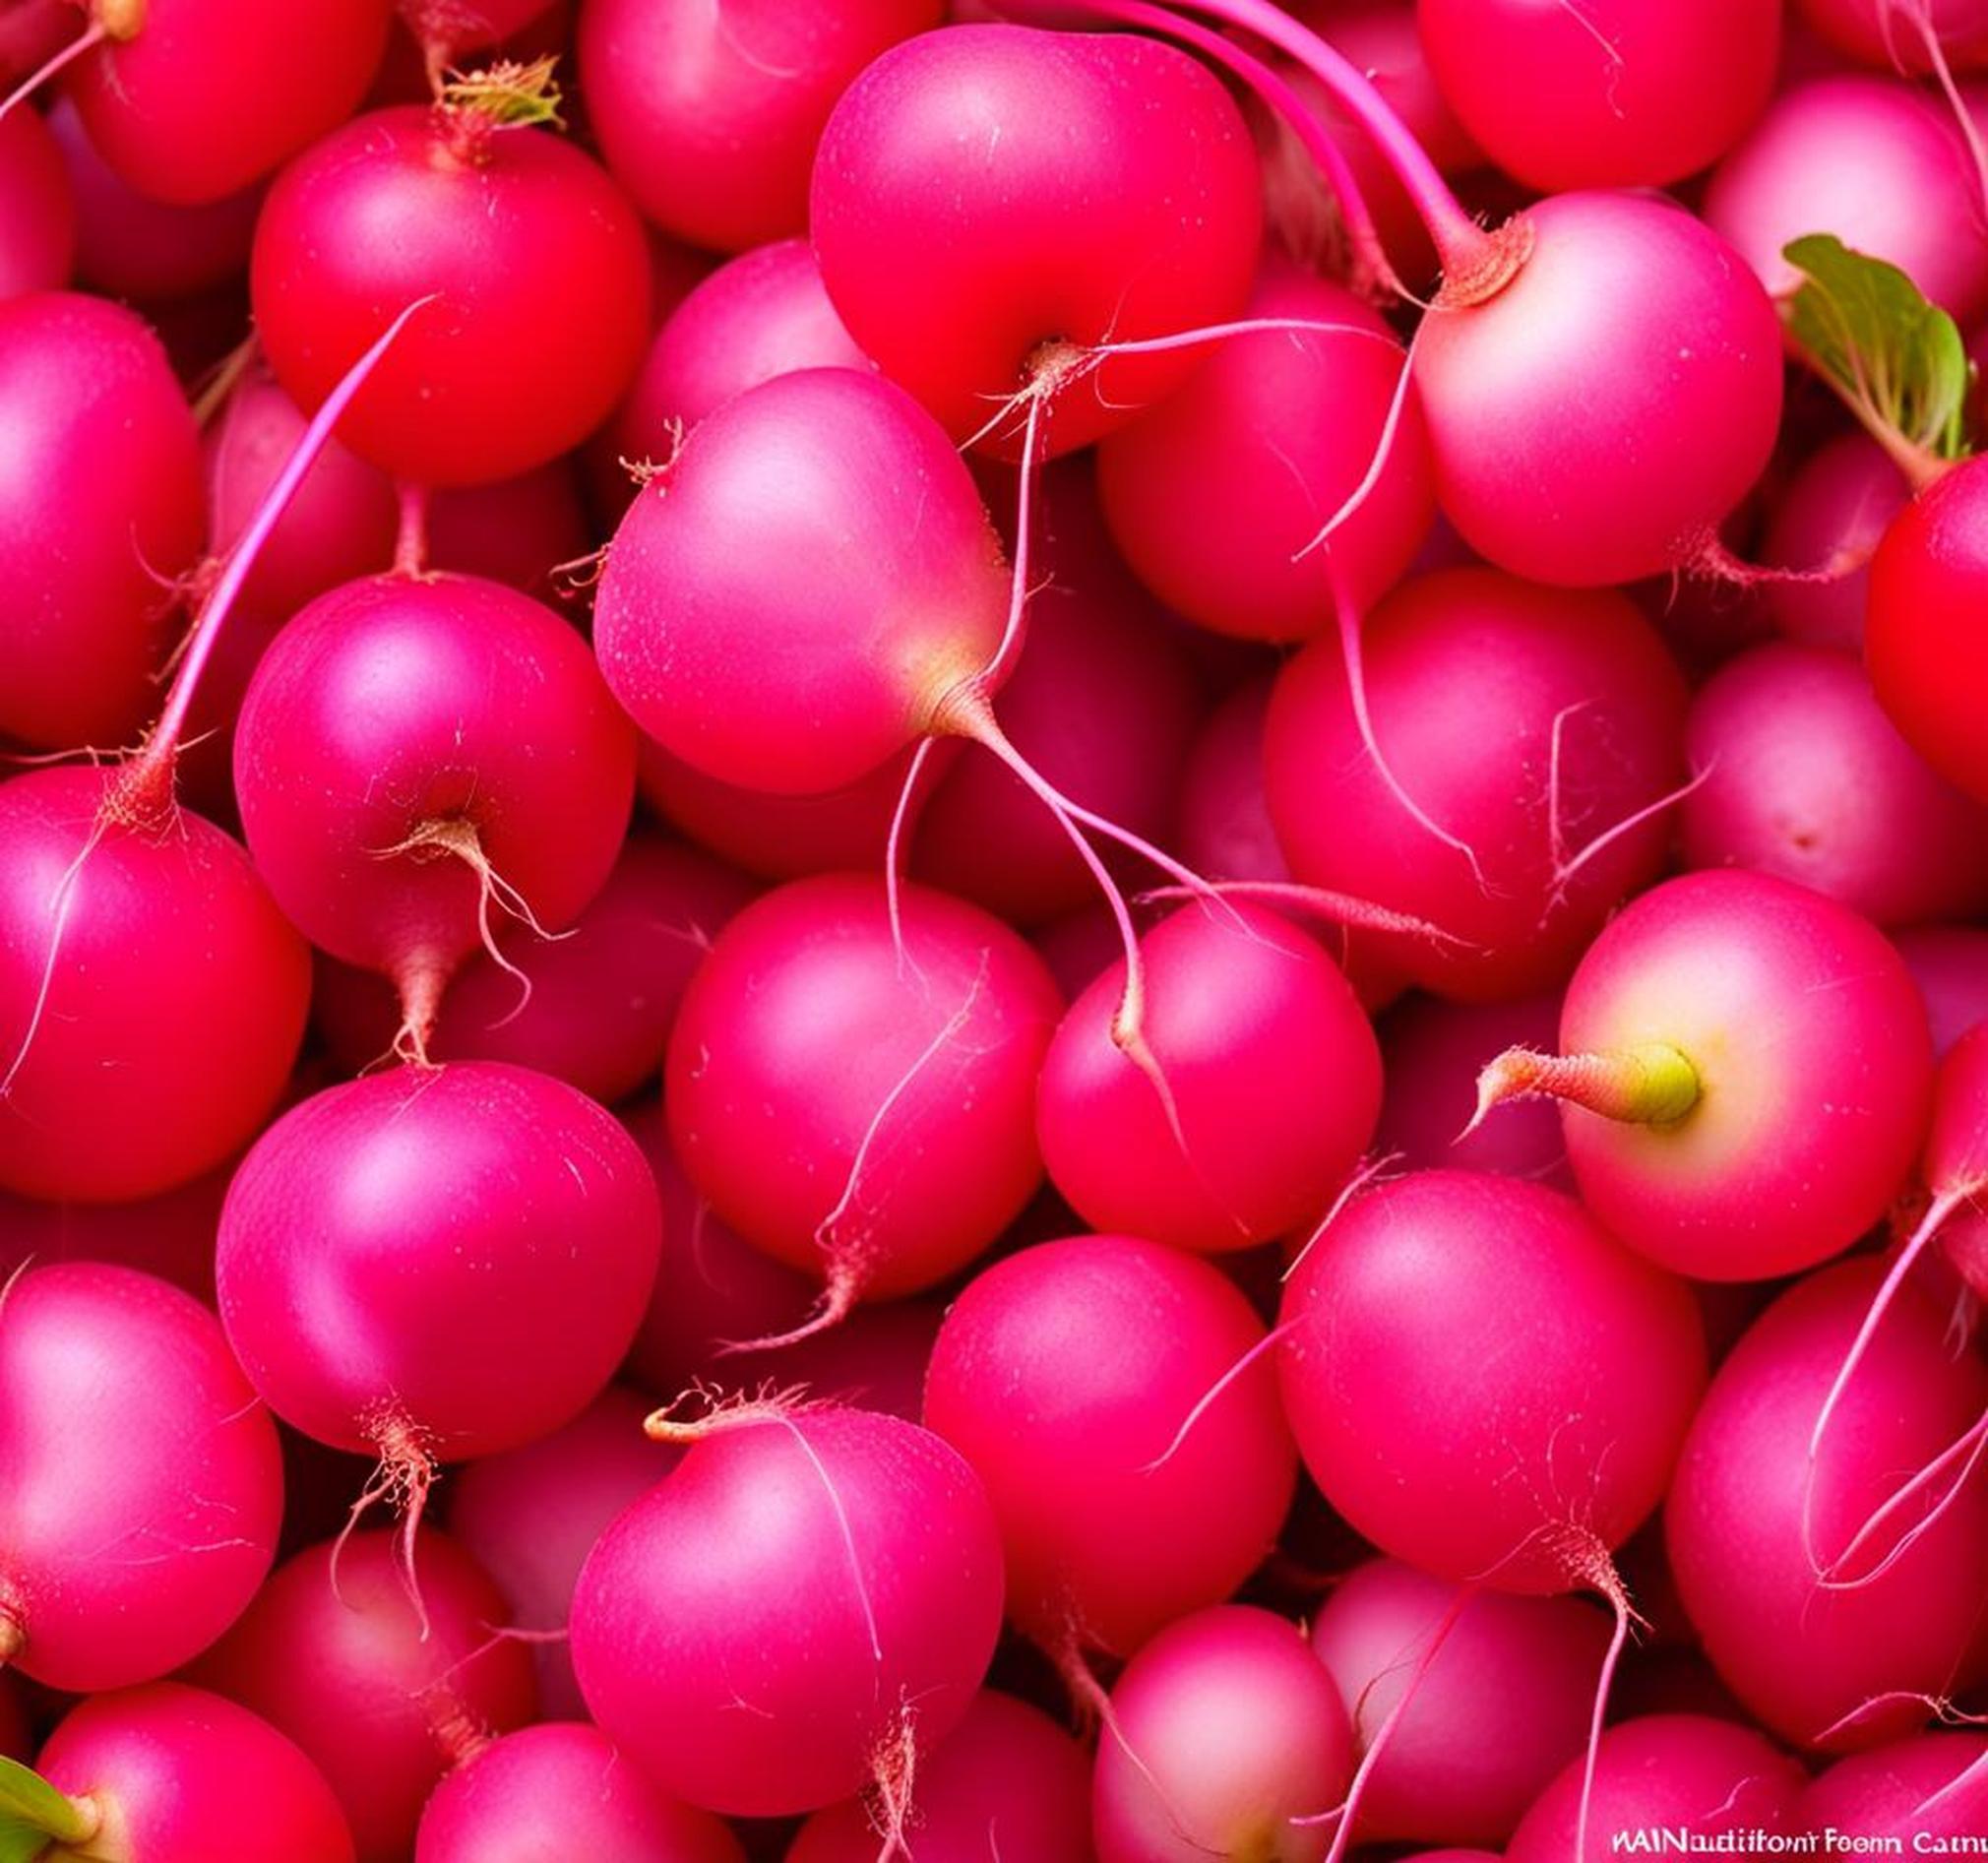 Don’t Toss Those Radishes! Learn How to Freeze Them for Later